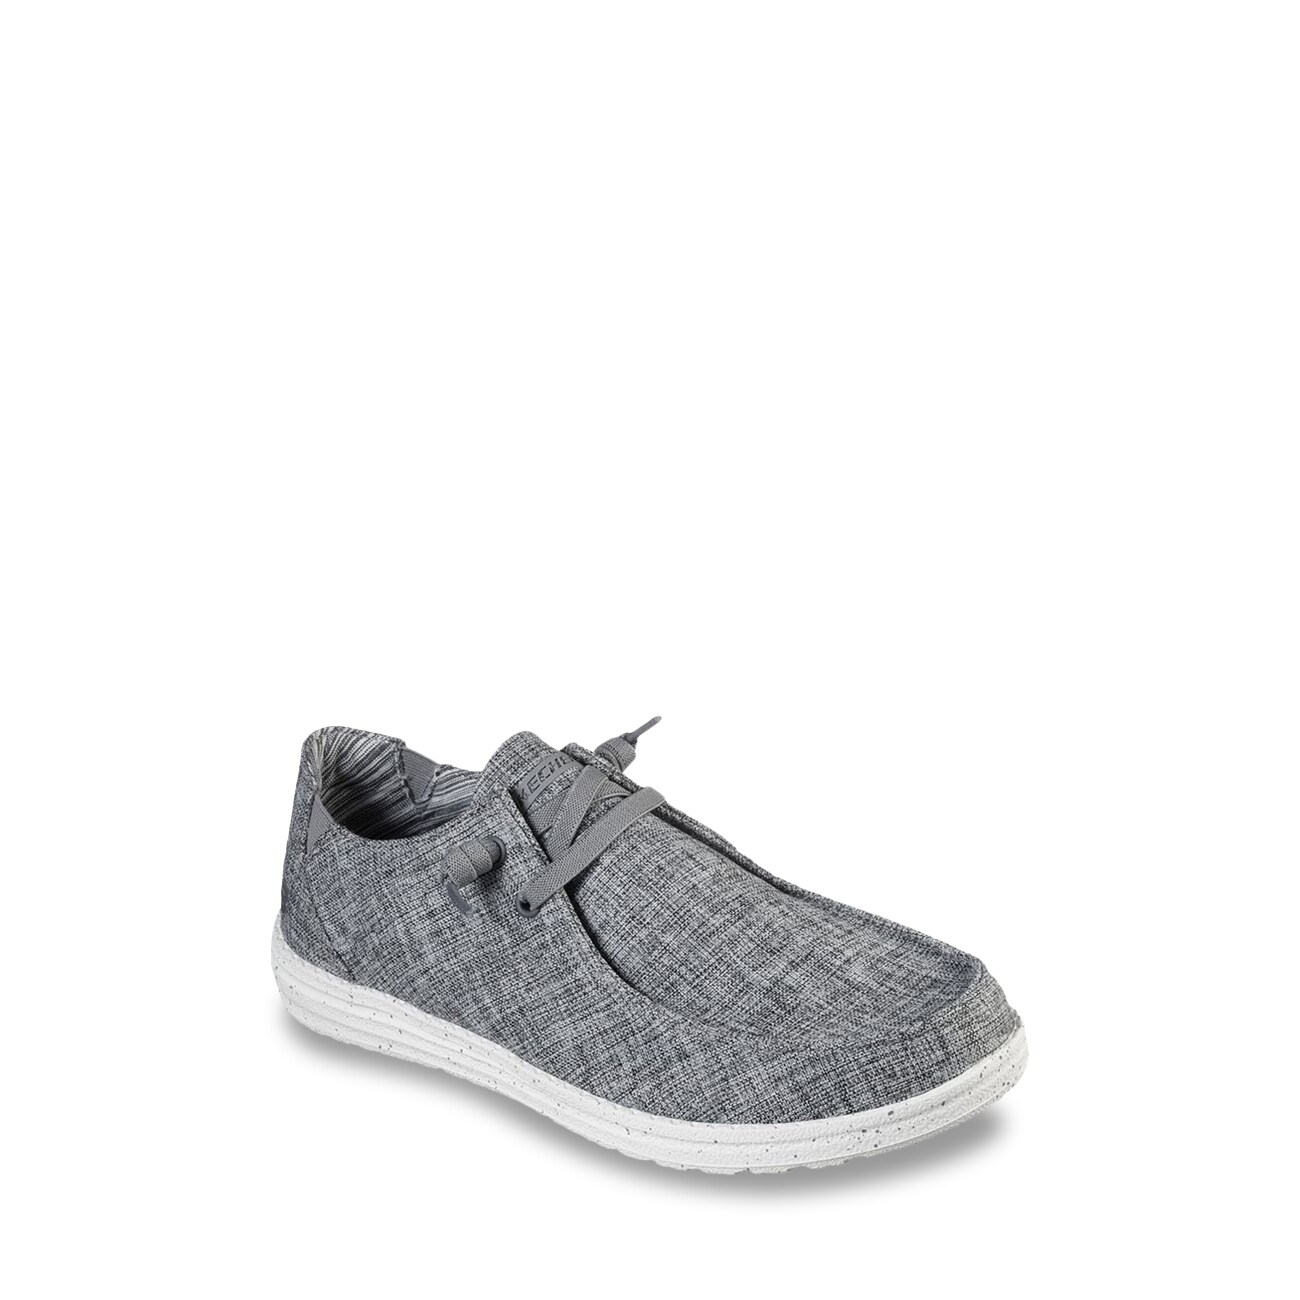 Skechers Men's Relaxed Fit Melson Slip-On | The Shoe Company